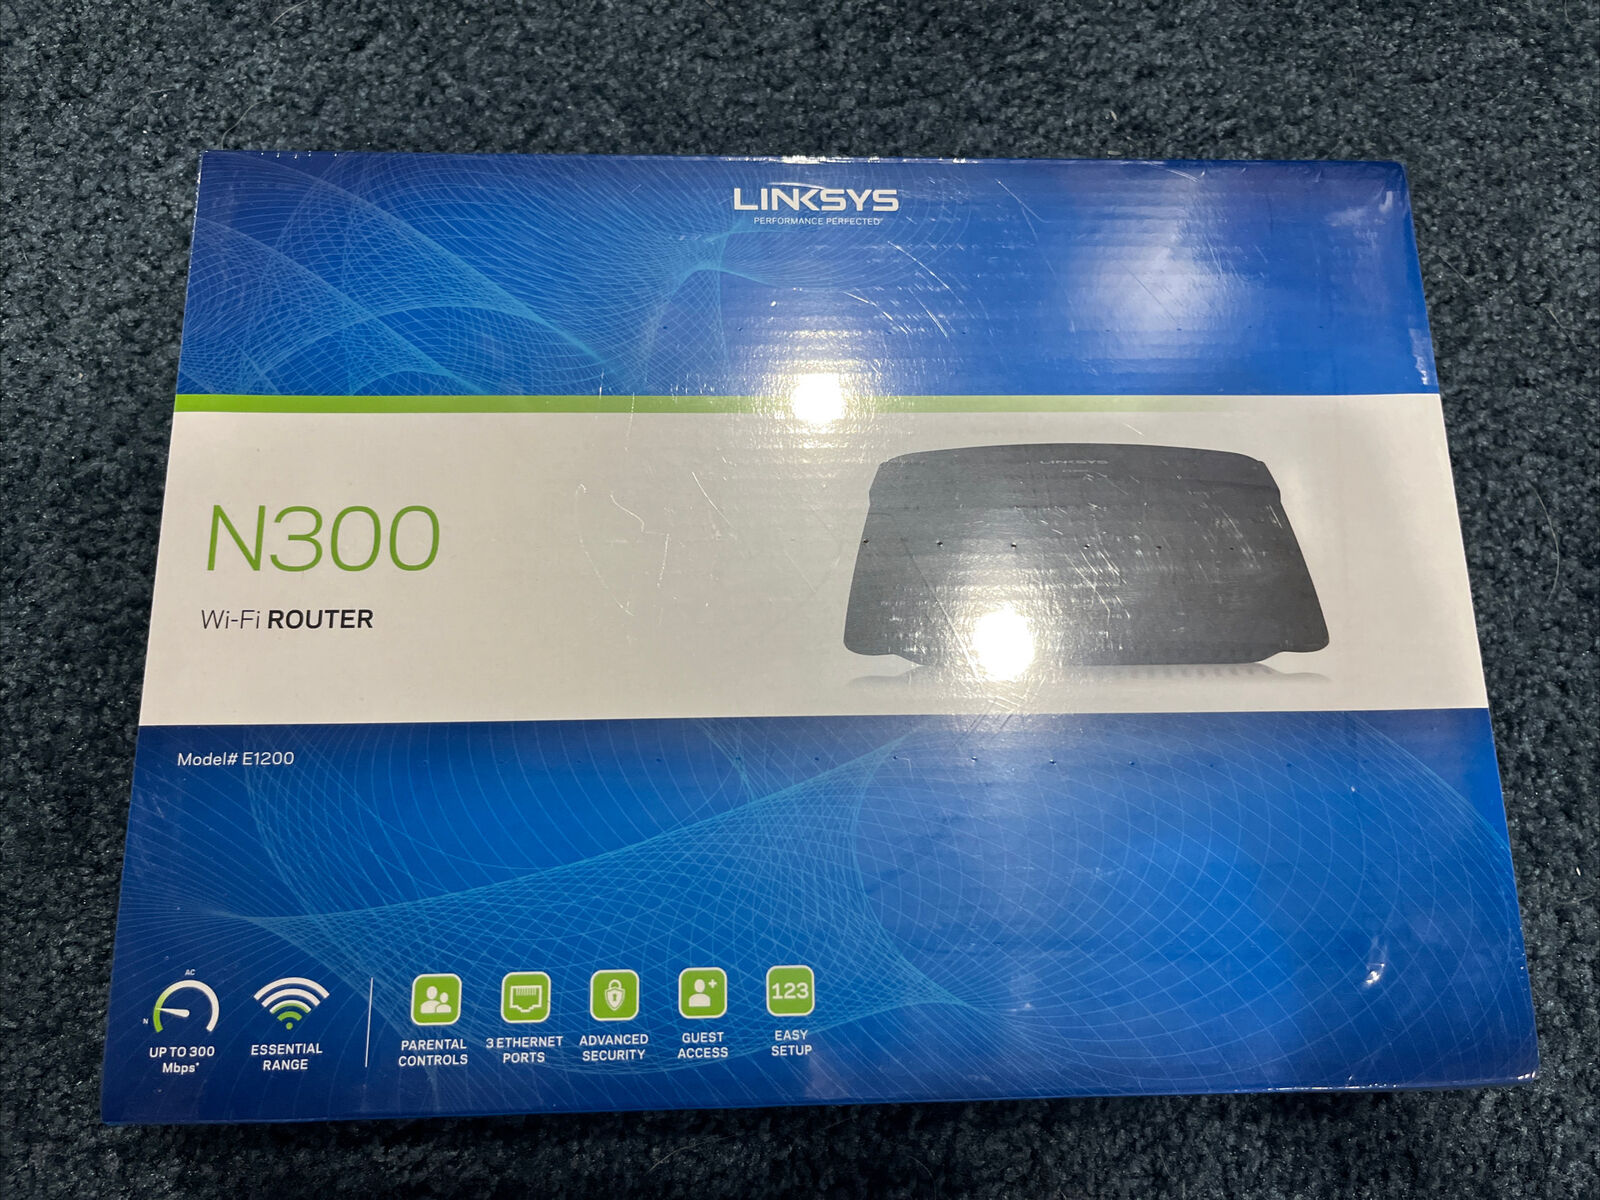 Linksys N300 WiFi Router E1200 - Up To 300Mbps - New in Sealed Box